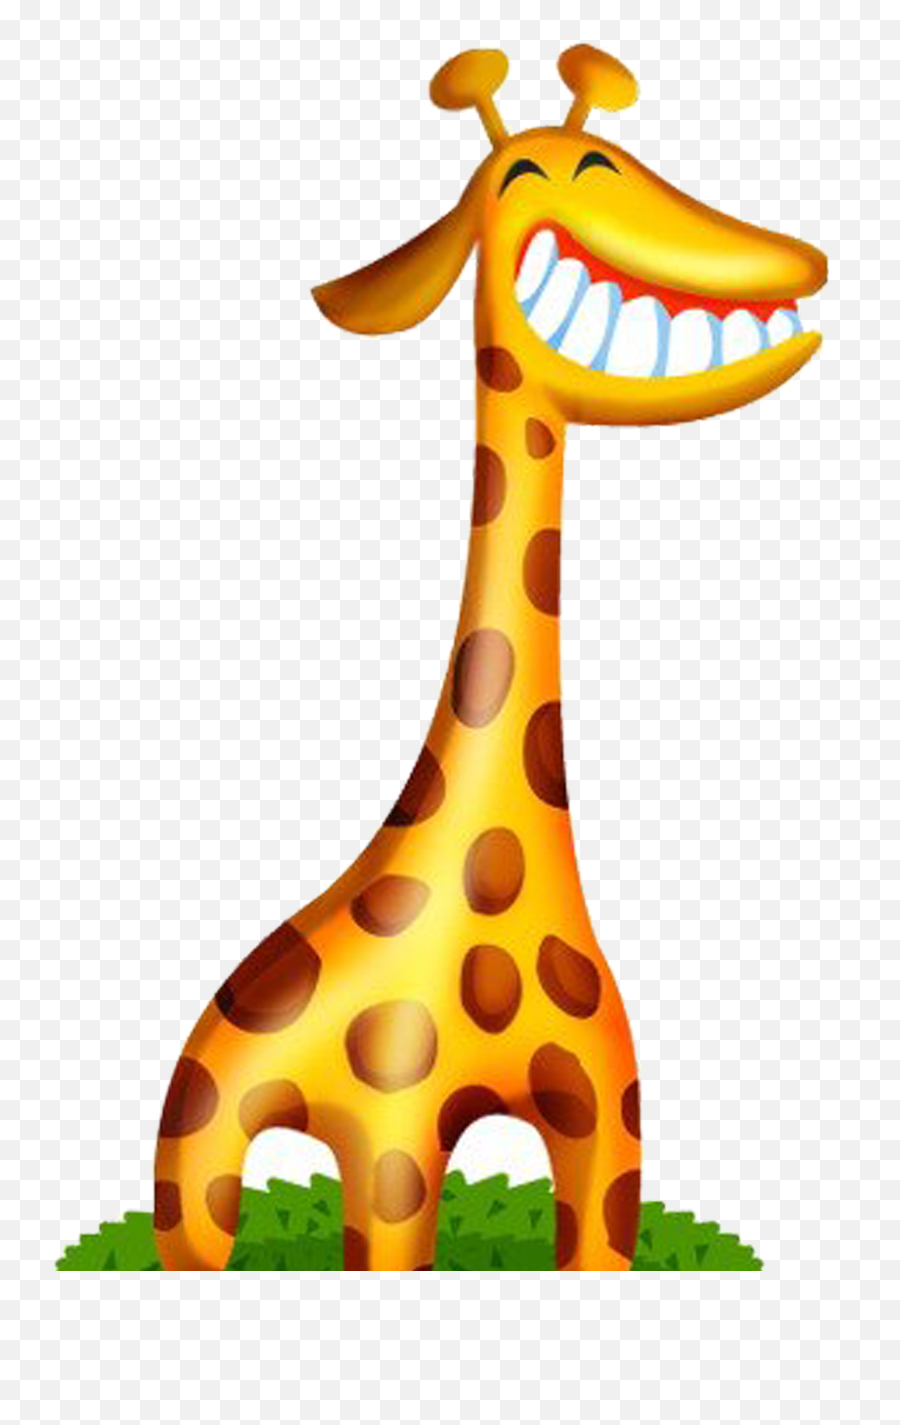 Download 2953 X 4 0 - Giraffe Icon Png Image With No Adaptation In Animals Clipart,0 Icon